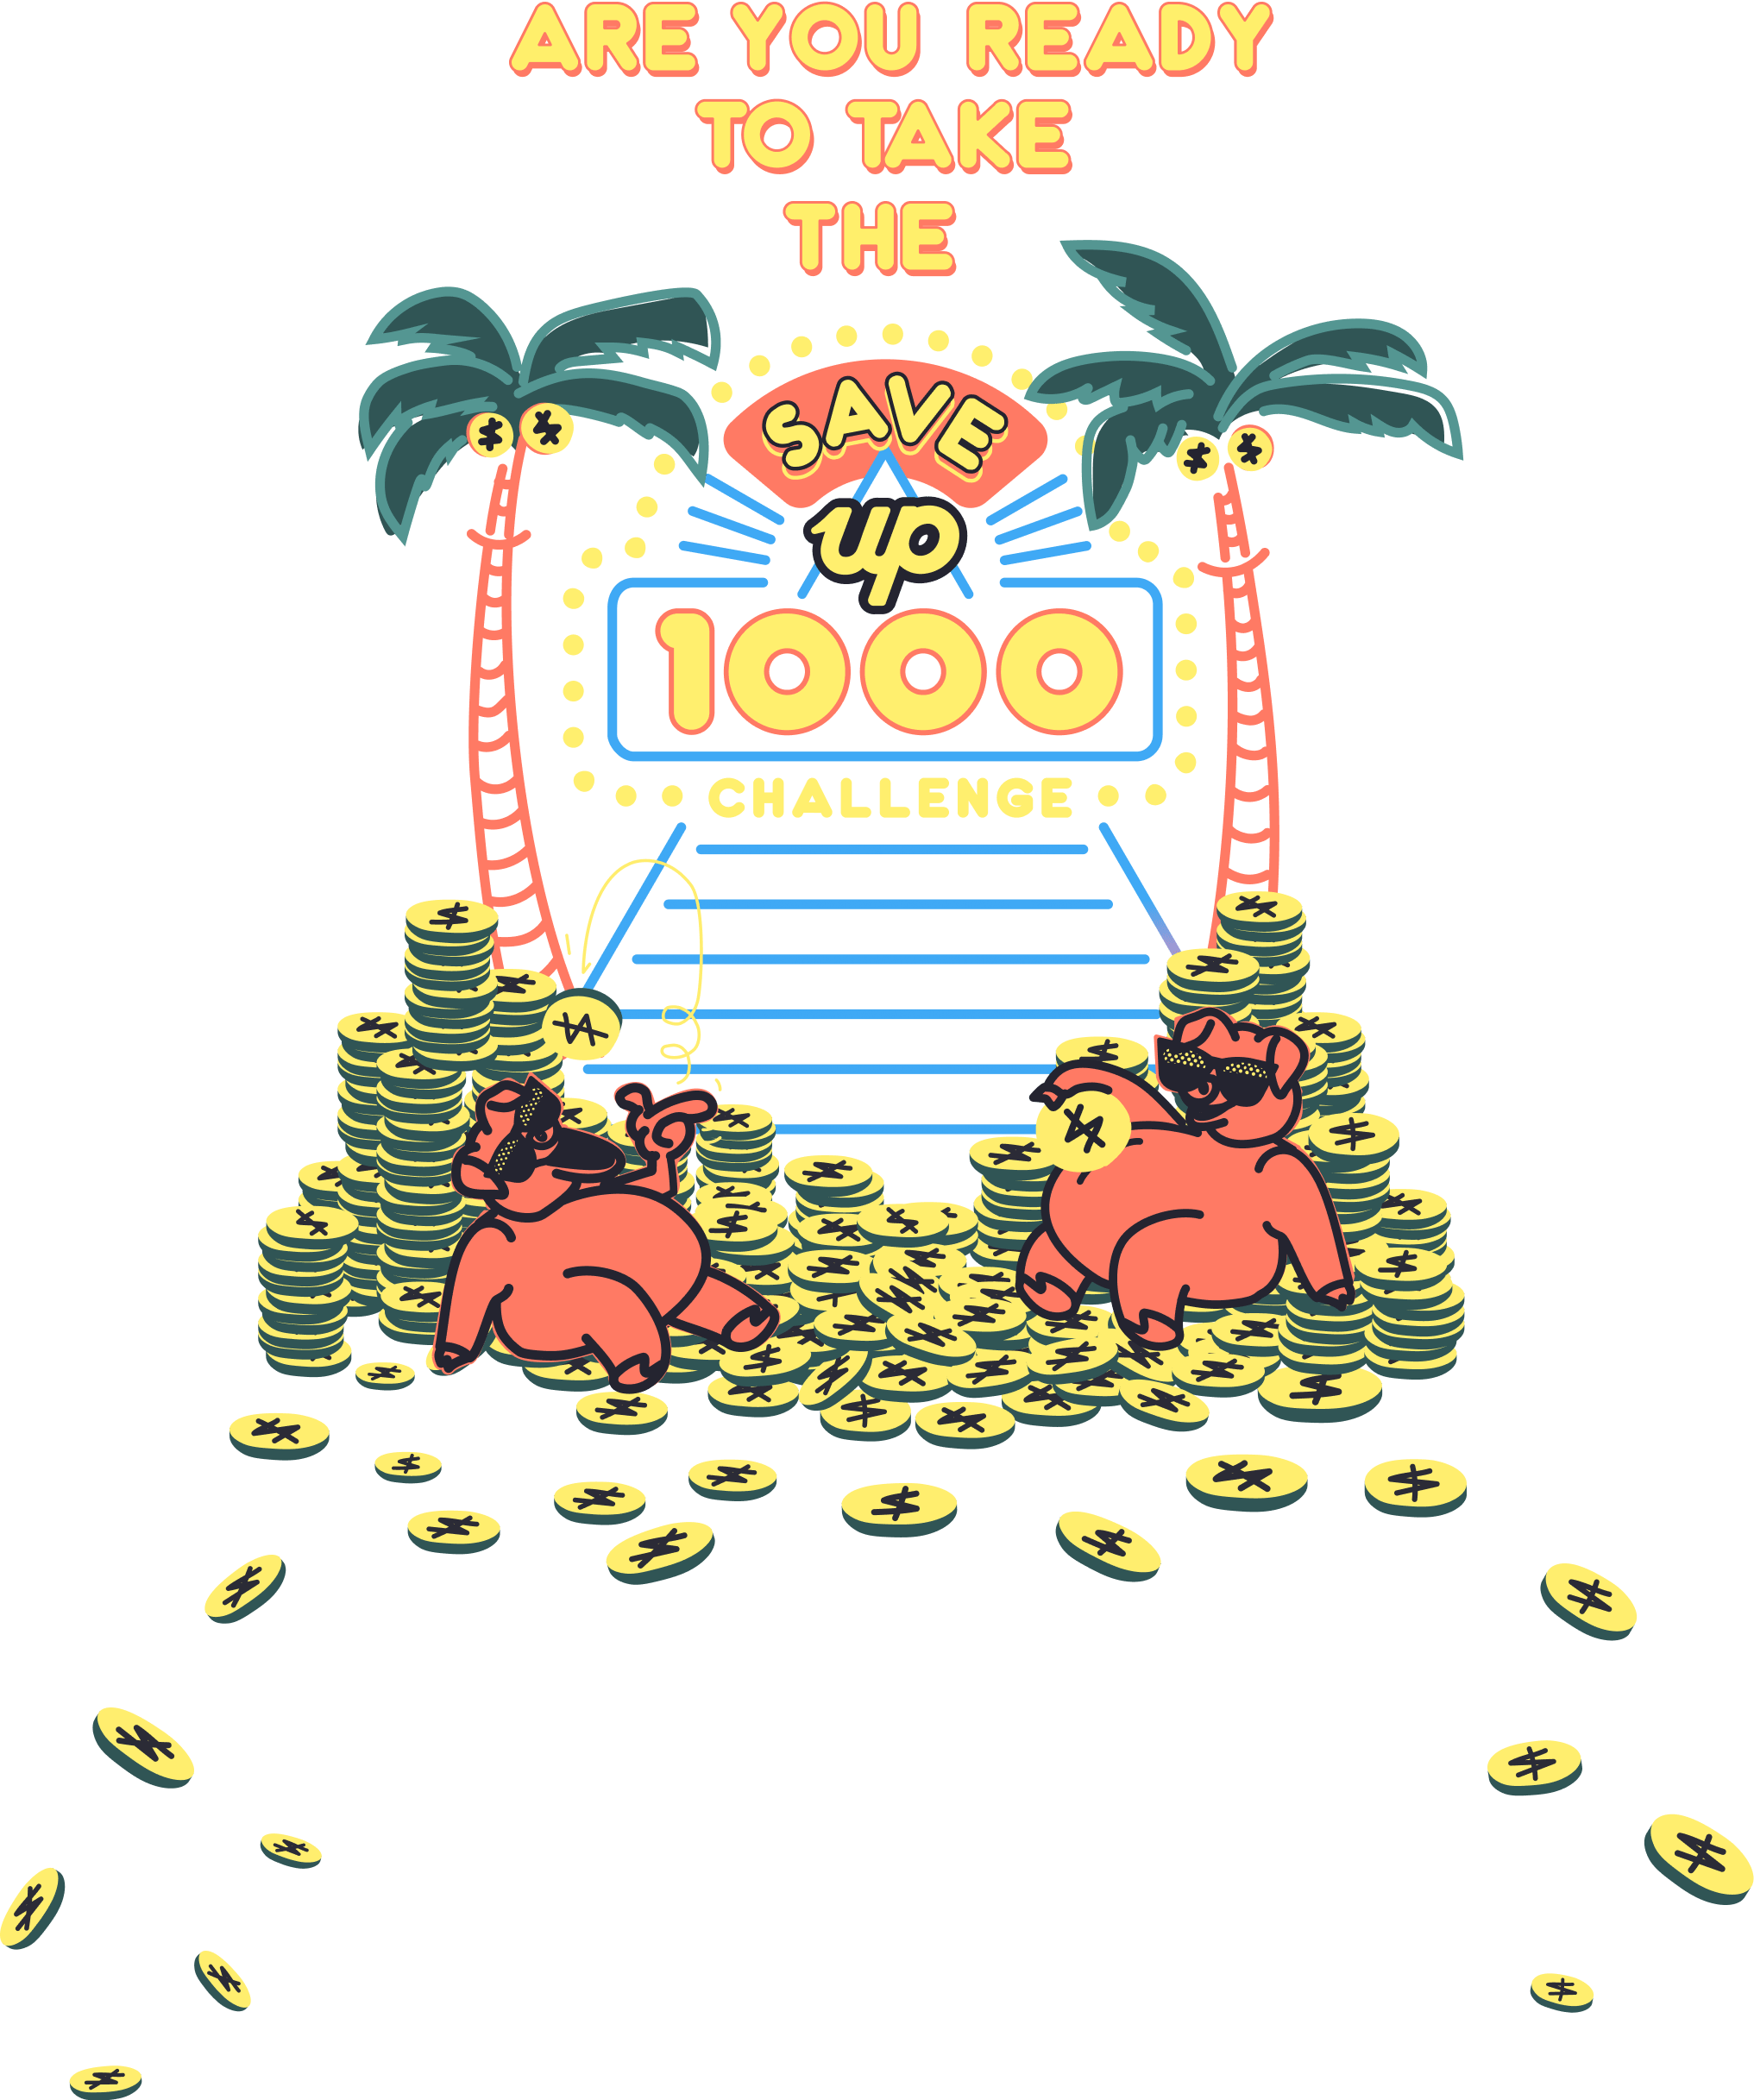 Are you ready to take the Save Up 1000 challenge?